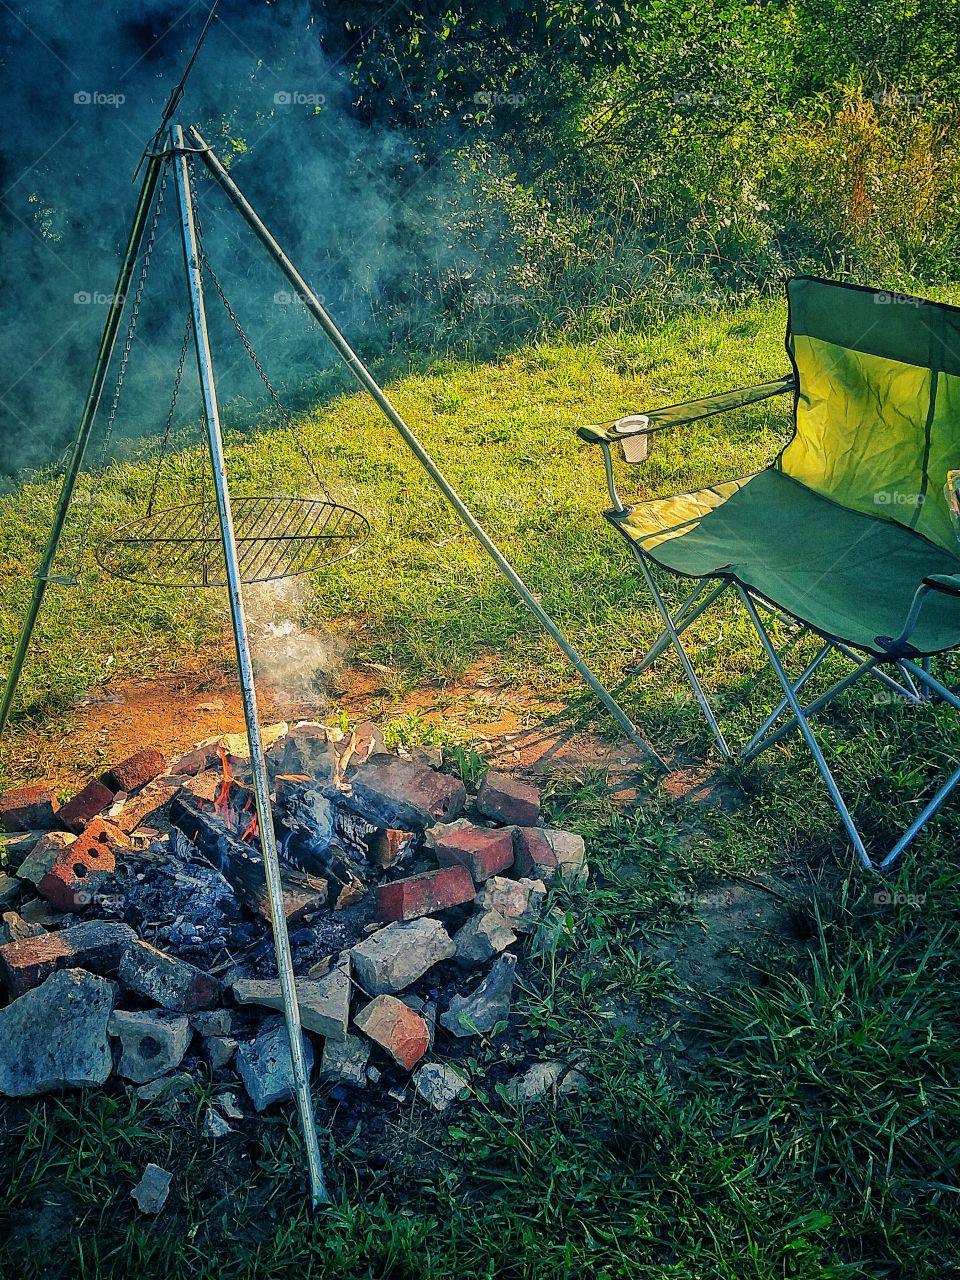 Campfire after a day out on the trails